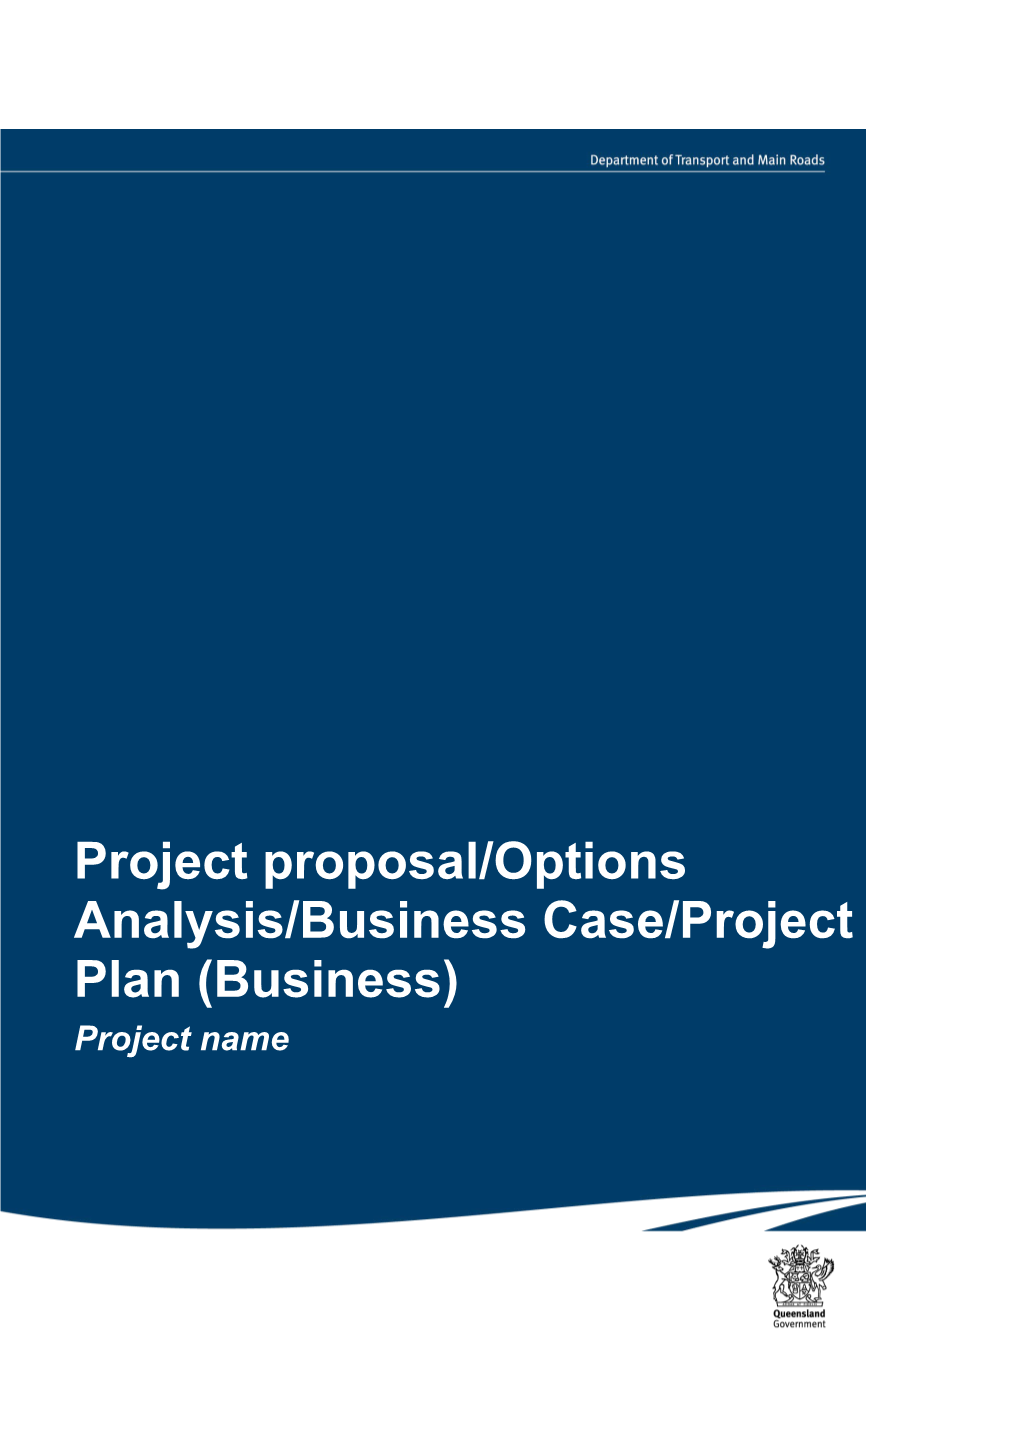 Project Proposal/Options Analysis/Business Case/Project Plan (Business)